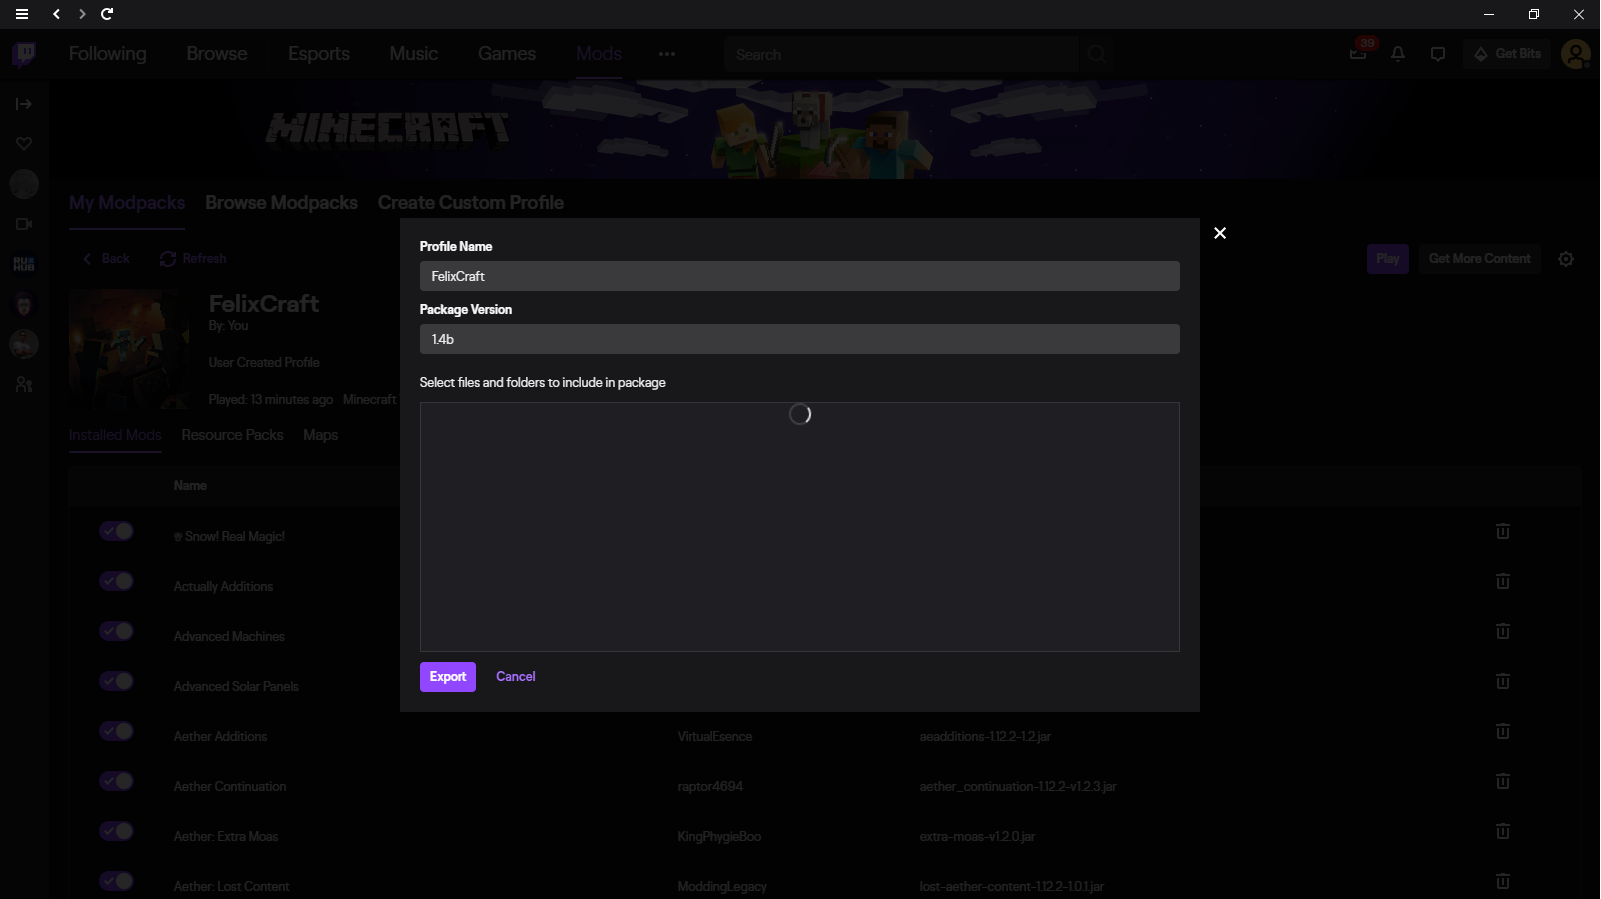 twitch launcher modpack wont launch with minecraft open